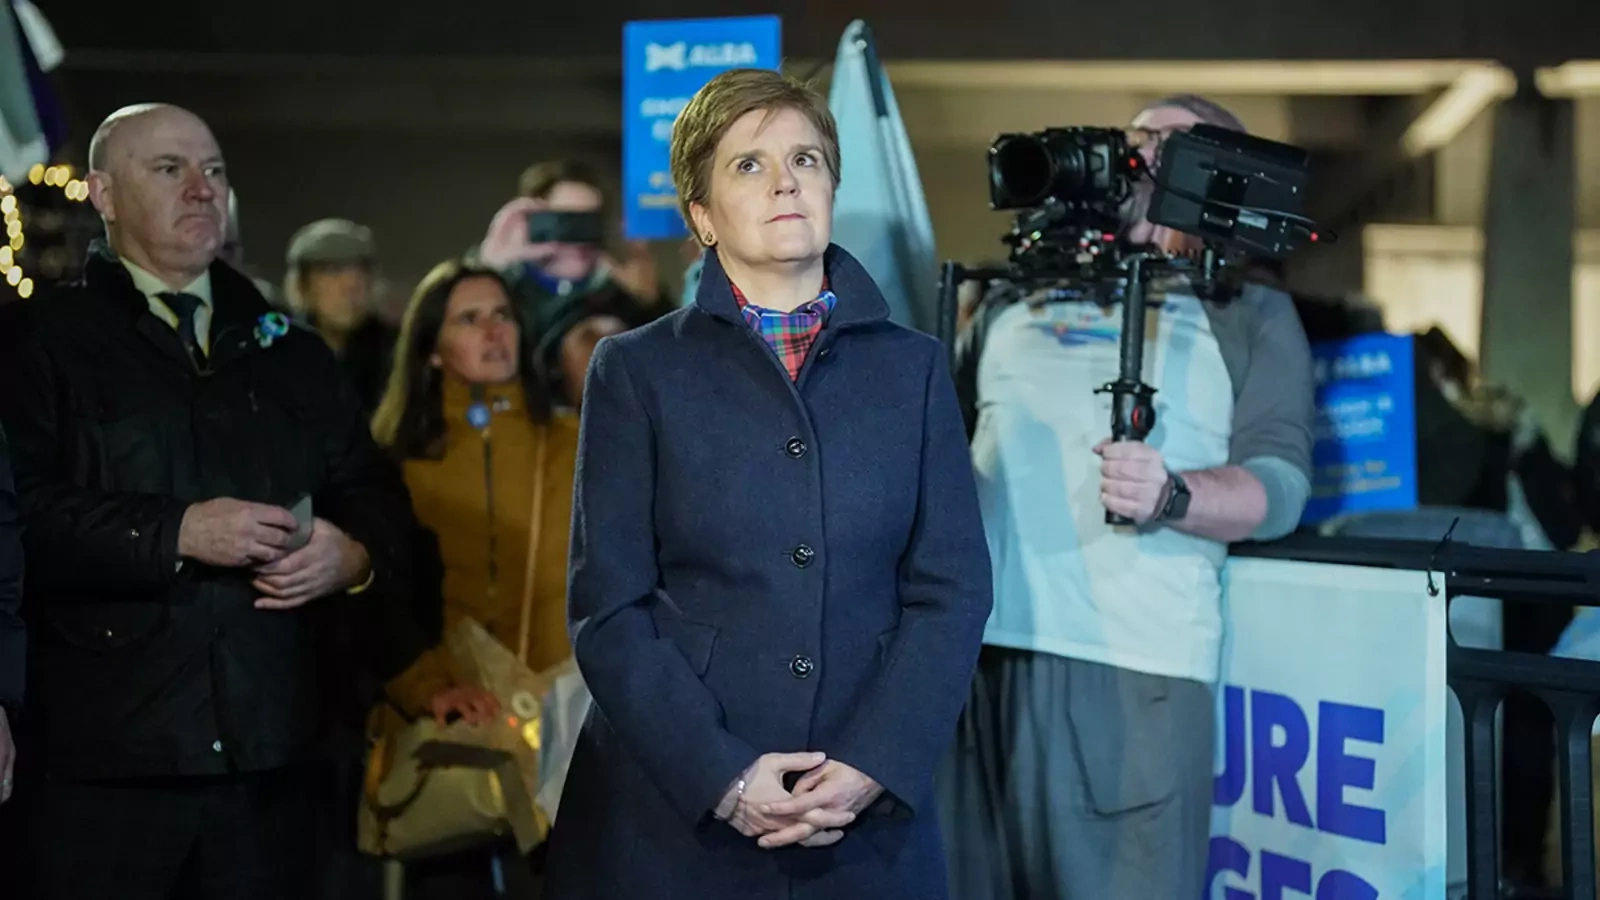 First Minister Nicola Sturgeon, leader of the Scottish National Party, attends a pro-independence demonstration outside Holyrood, the Scottish Parliament, on November 23, 2022.